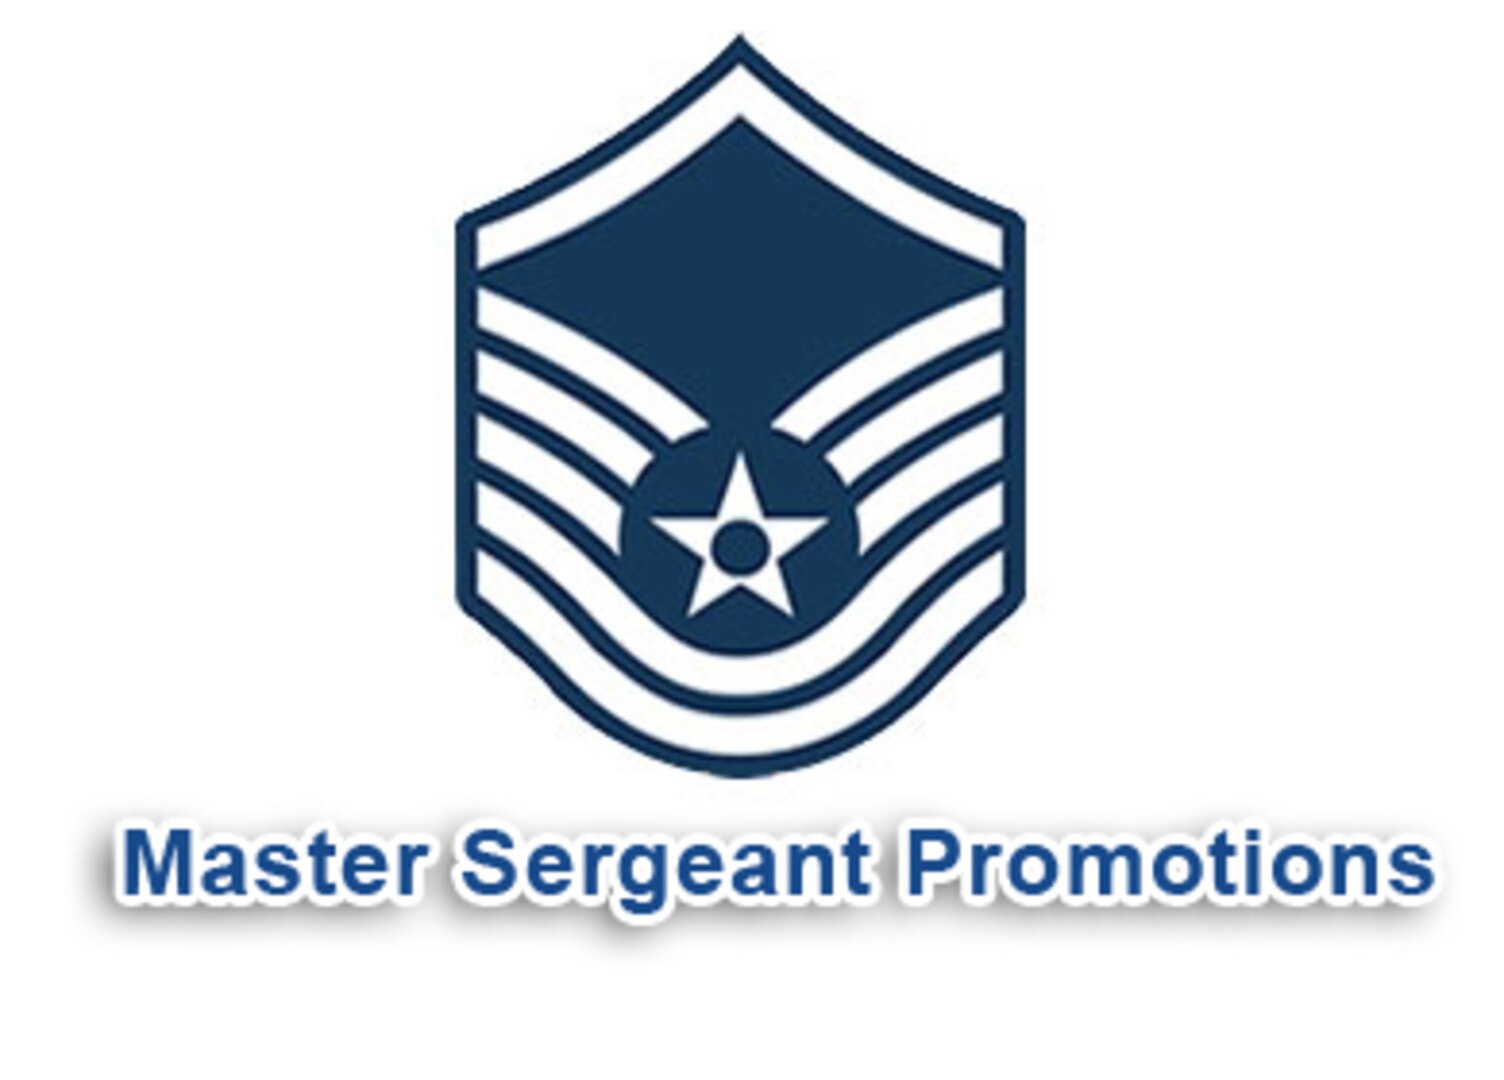 Master Sergeant Promotions